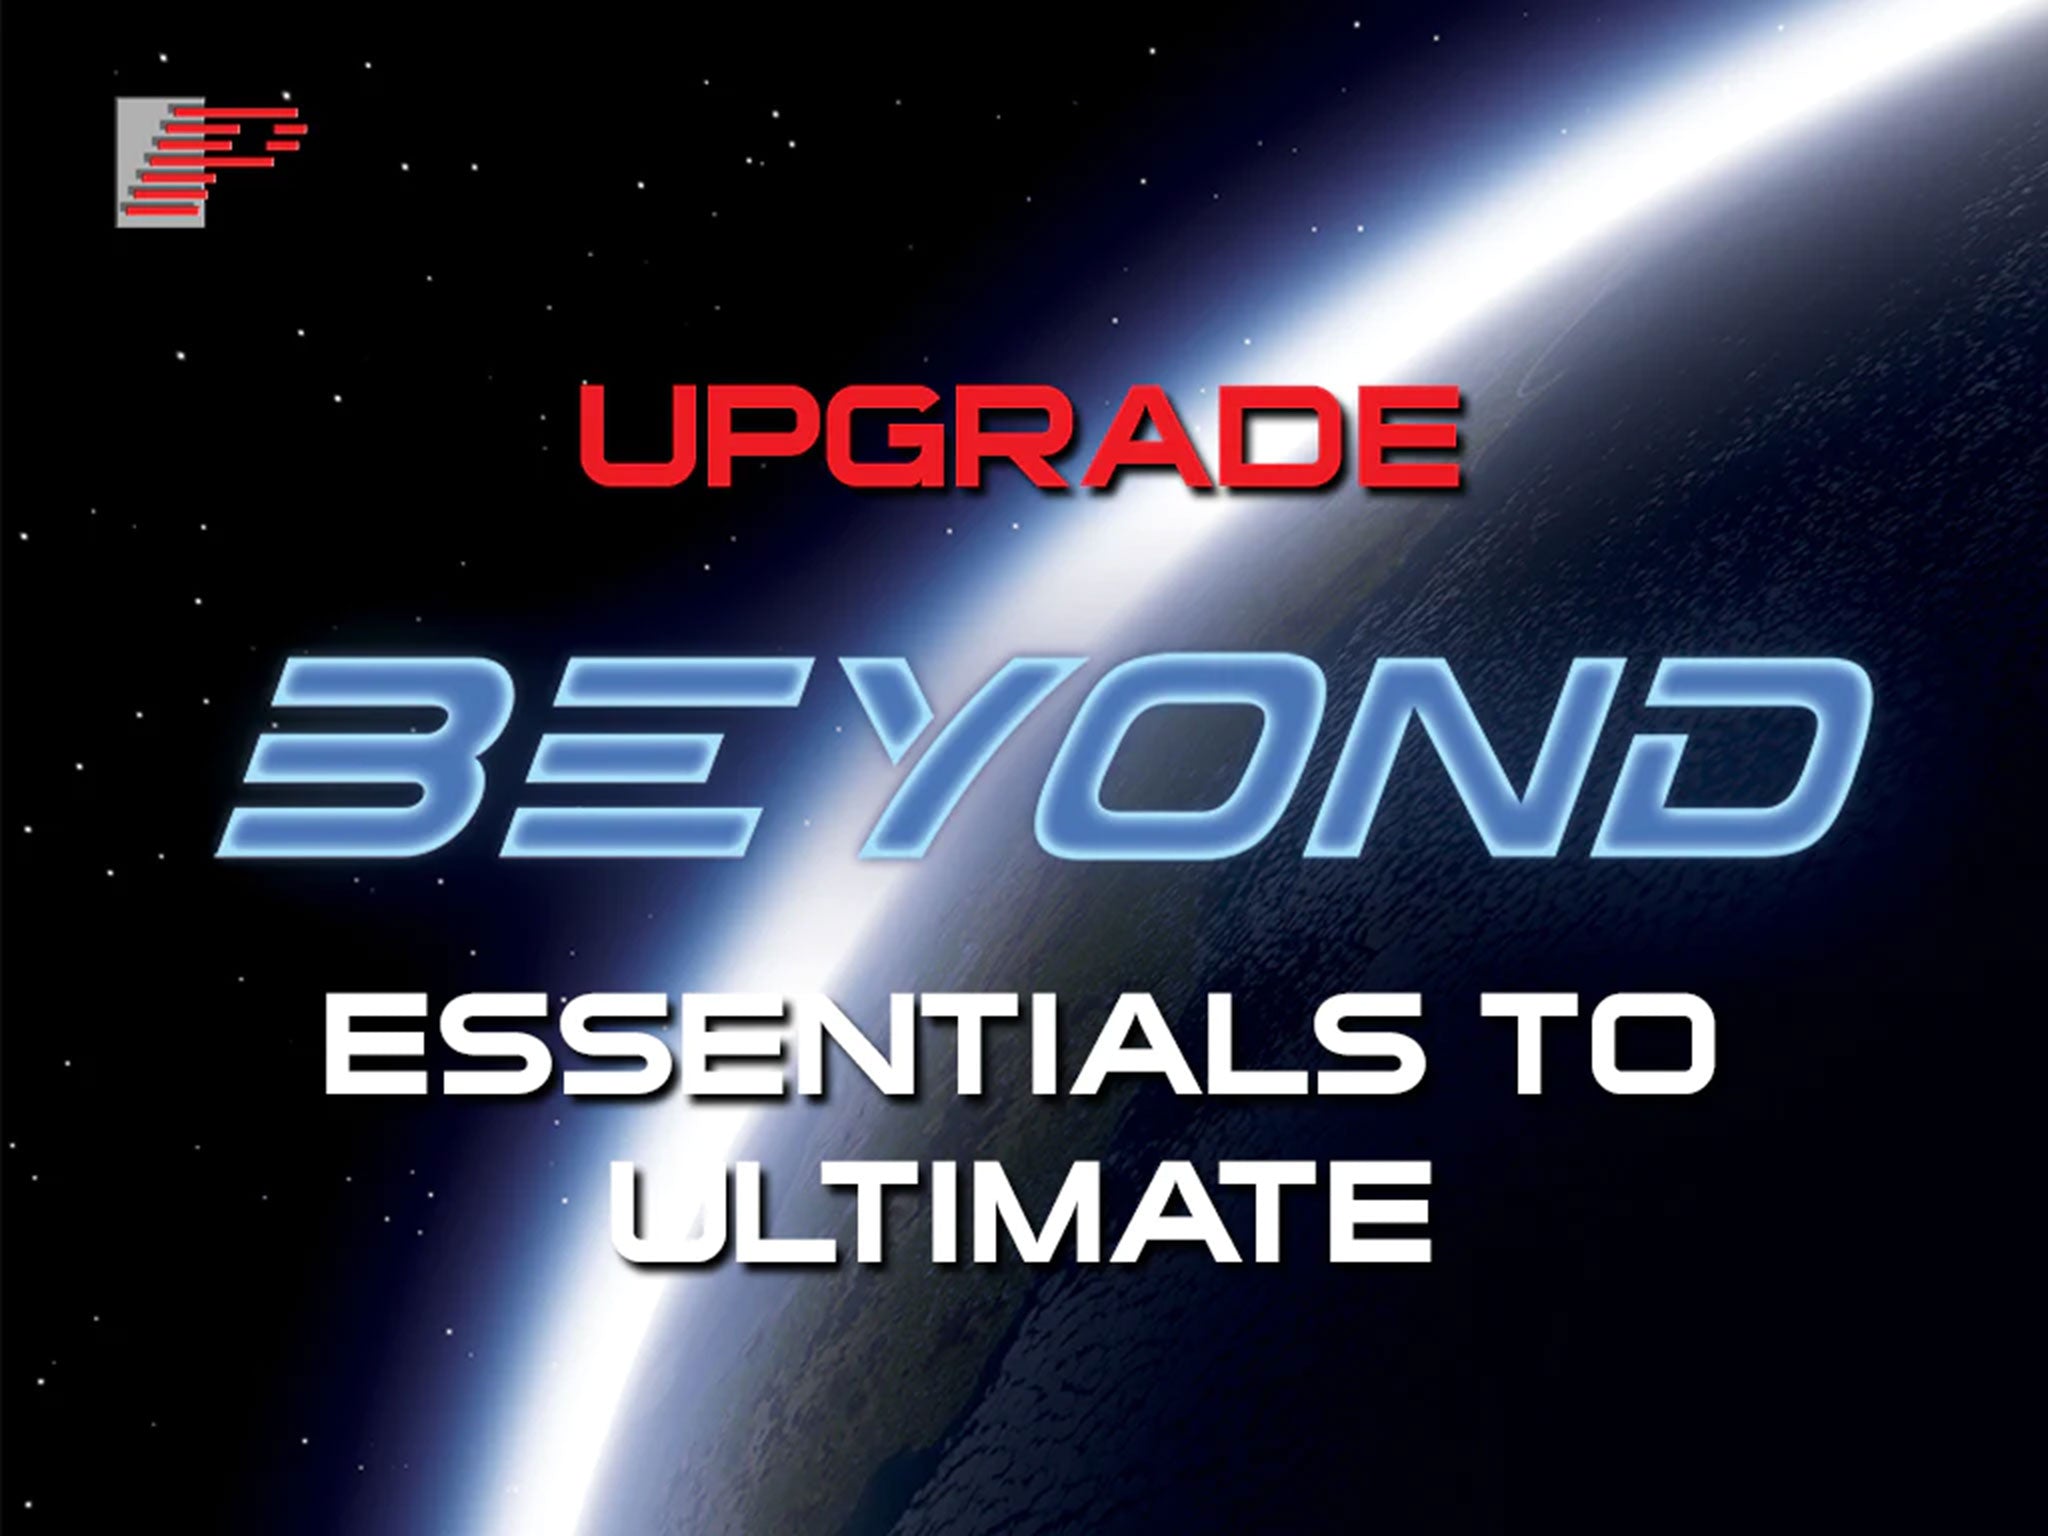 Pangolin BEYOND Essentials to Ultimate license upgrade